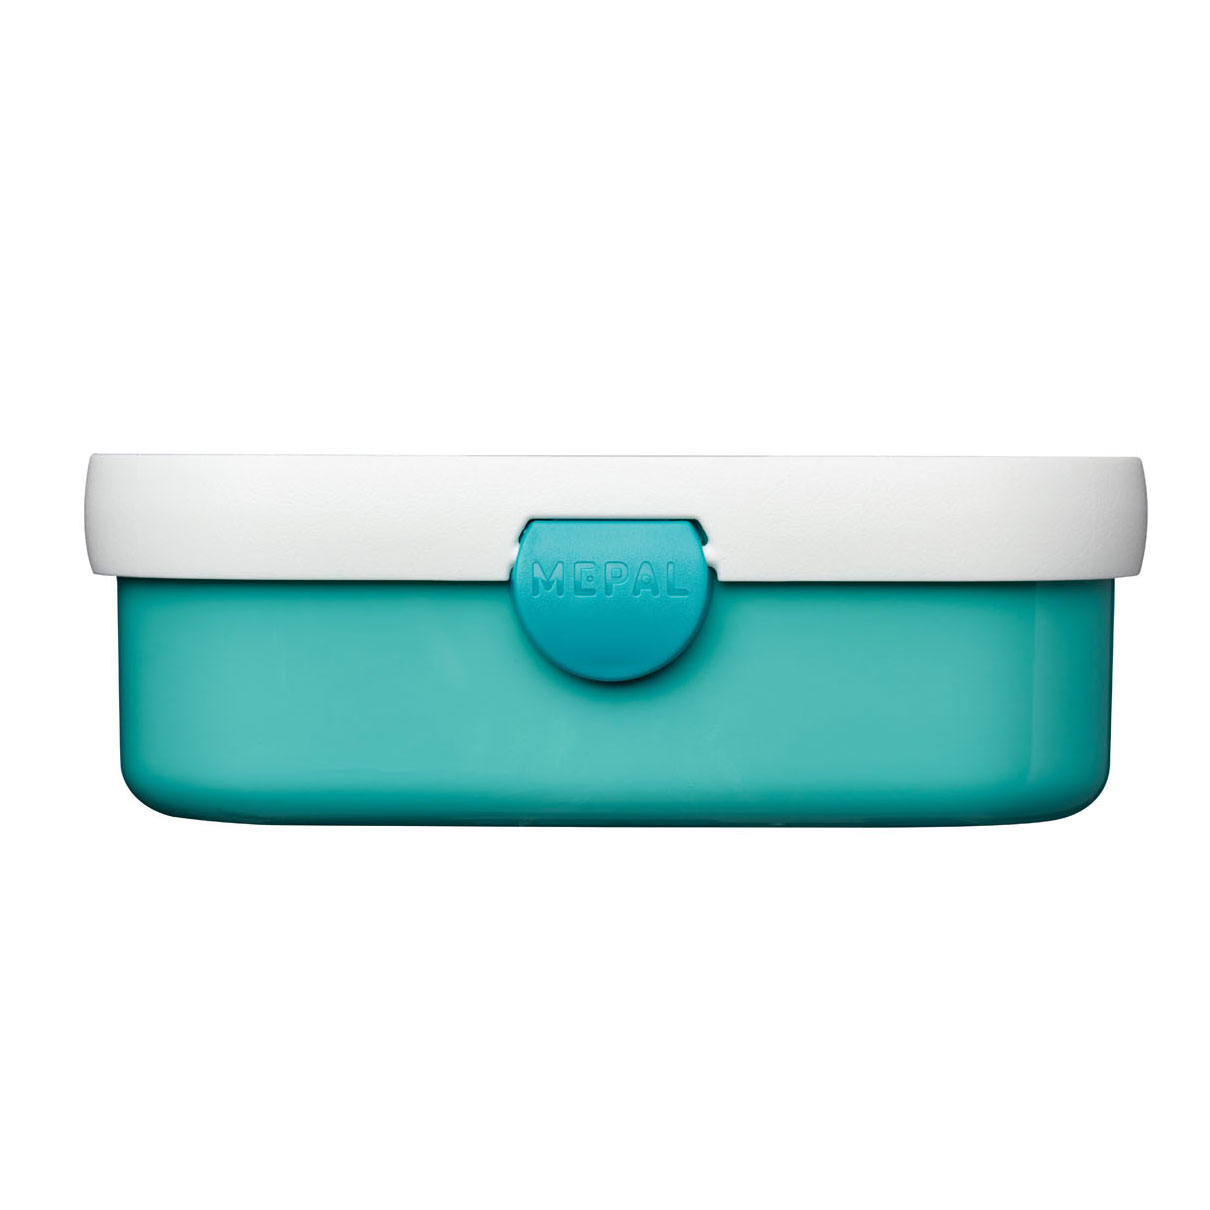 Mepal Campus Lunchbox - Turquoise